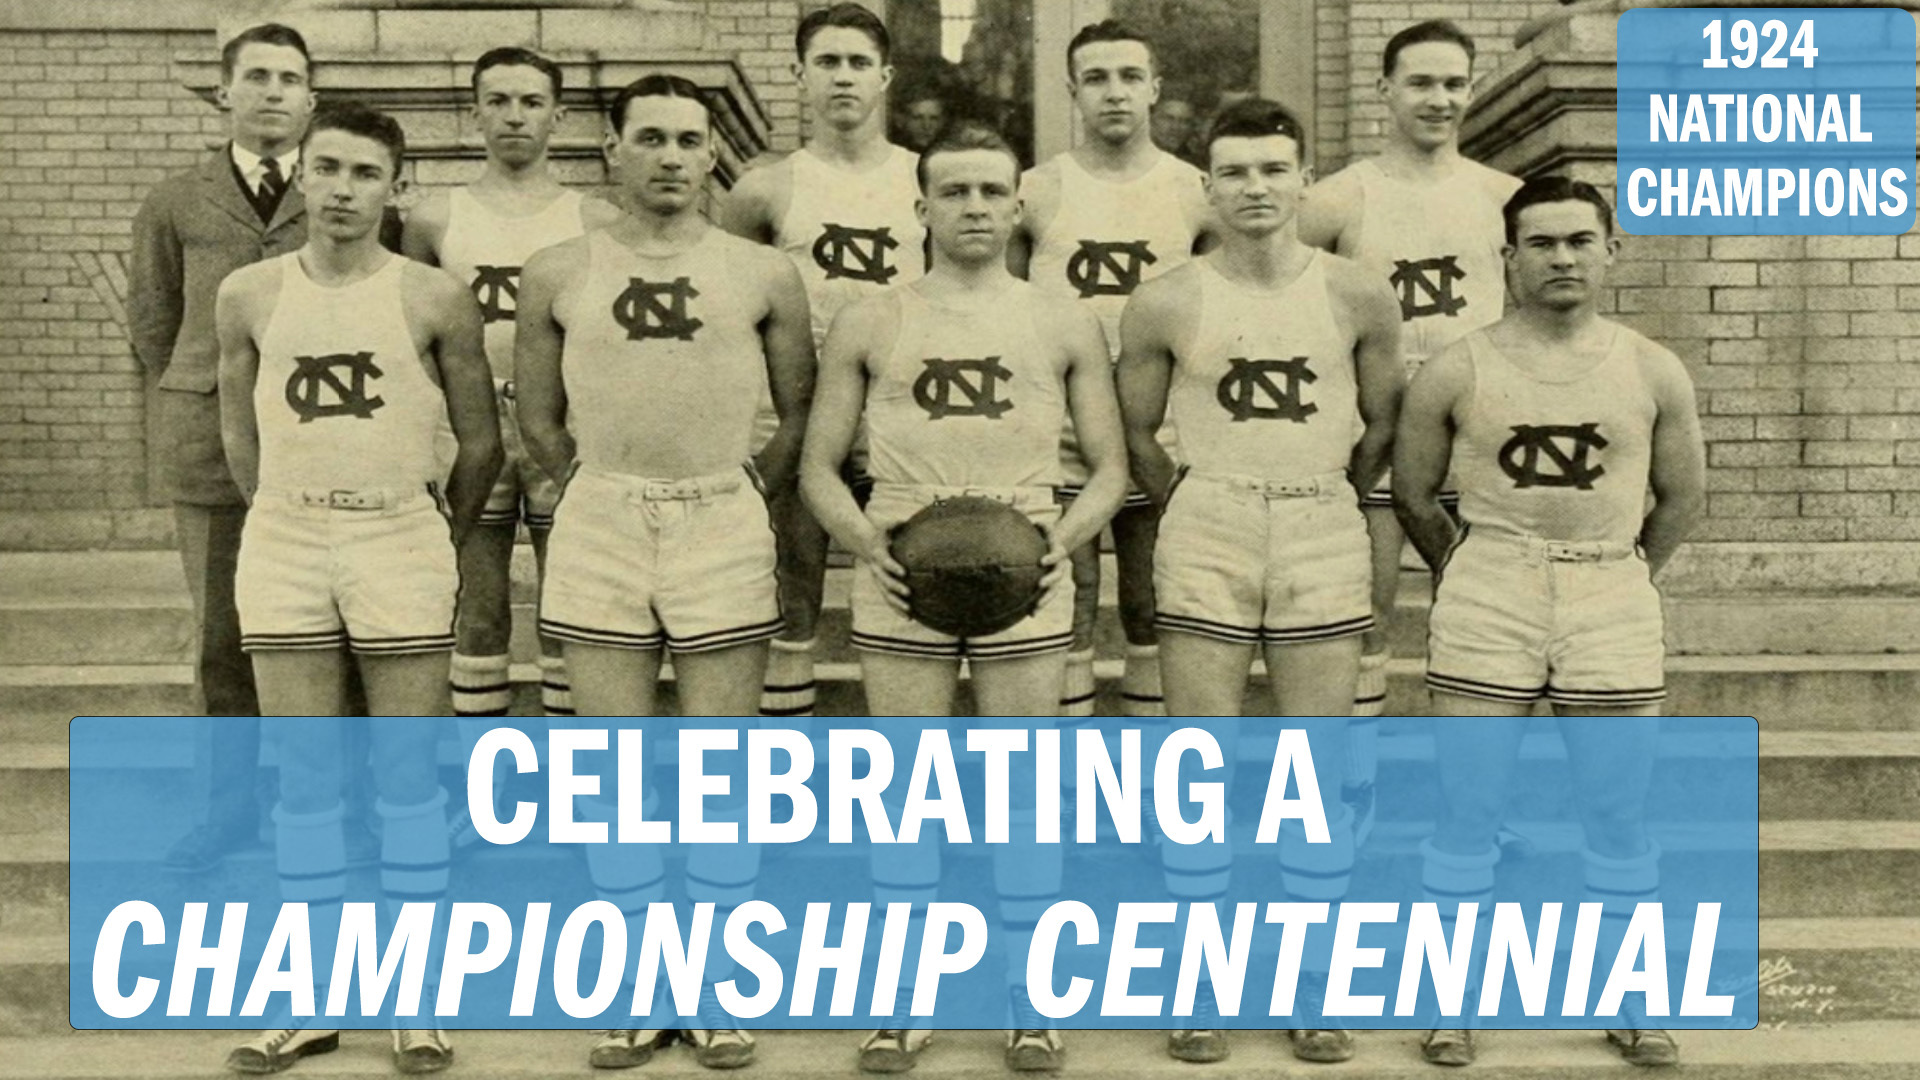 Team picture of Carolina men's basketball in 1924